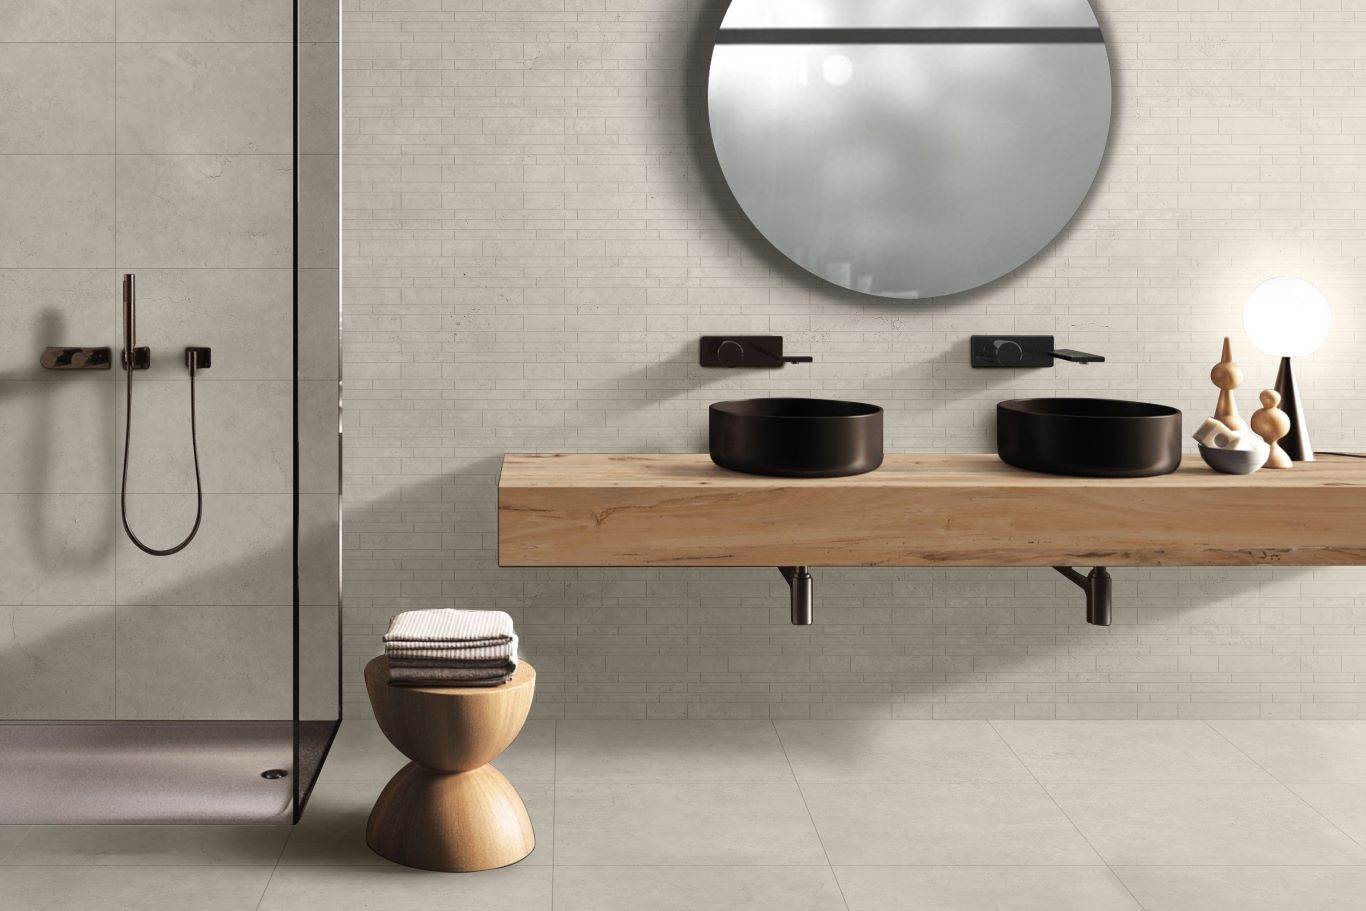 Transform your space with the versatility of stone-look porcelain tiles.